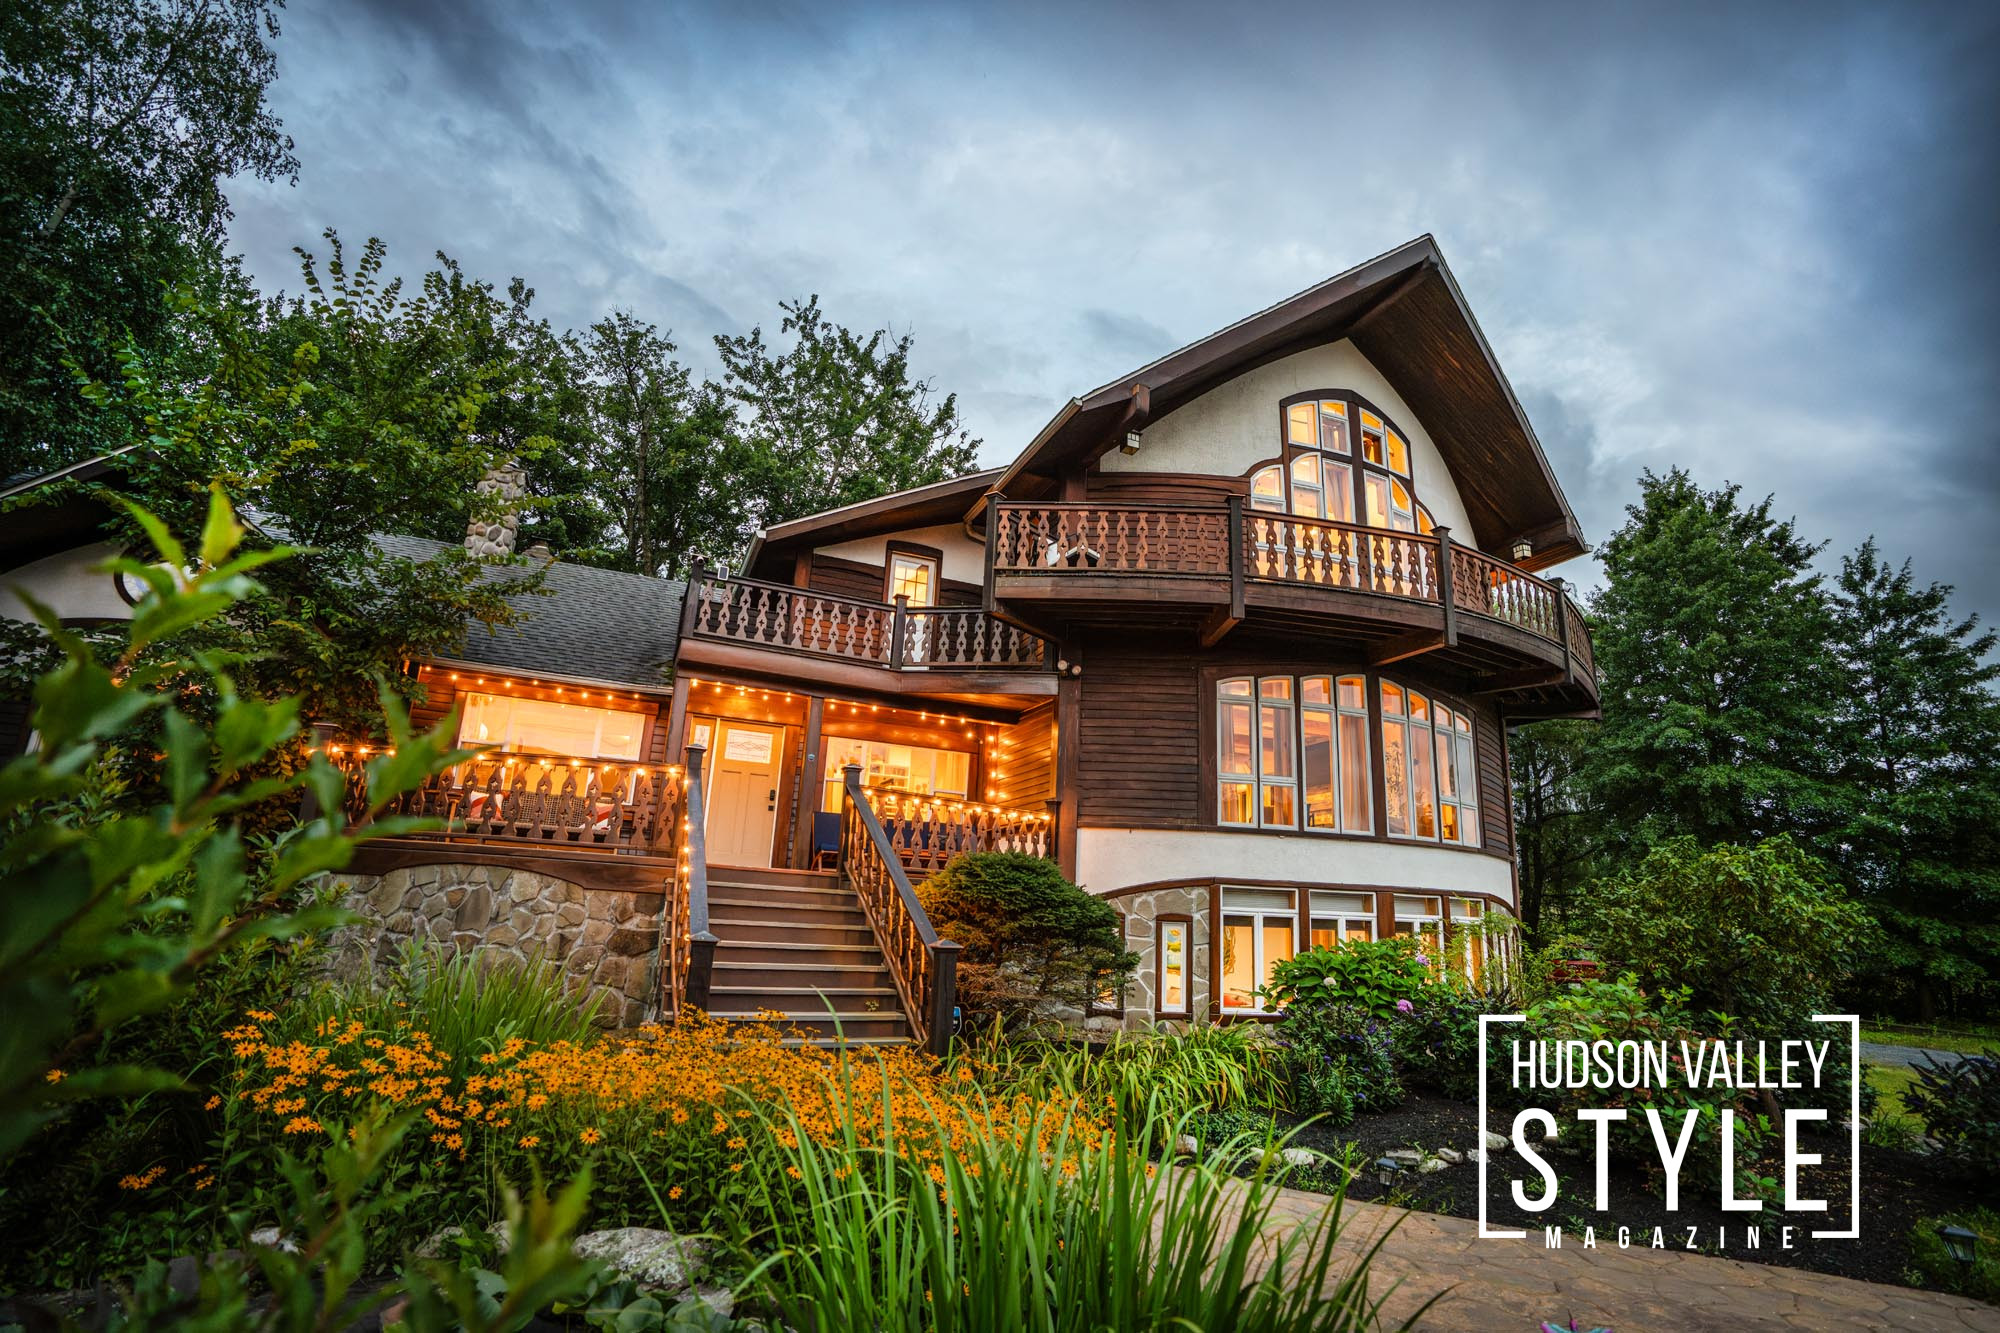 A Mystical Evening in Hudson Valley: Maxwell Alexander's Captivating Photoshoot at the Shawangunk Chalet – Presented by Alluvion Vacations – Photography by Maxwell Alexander for Alluvion Media